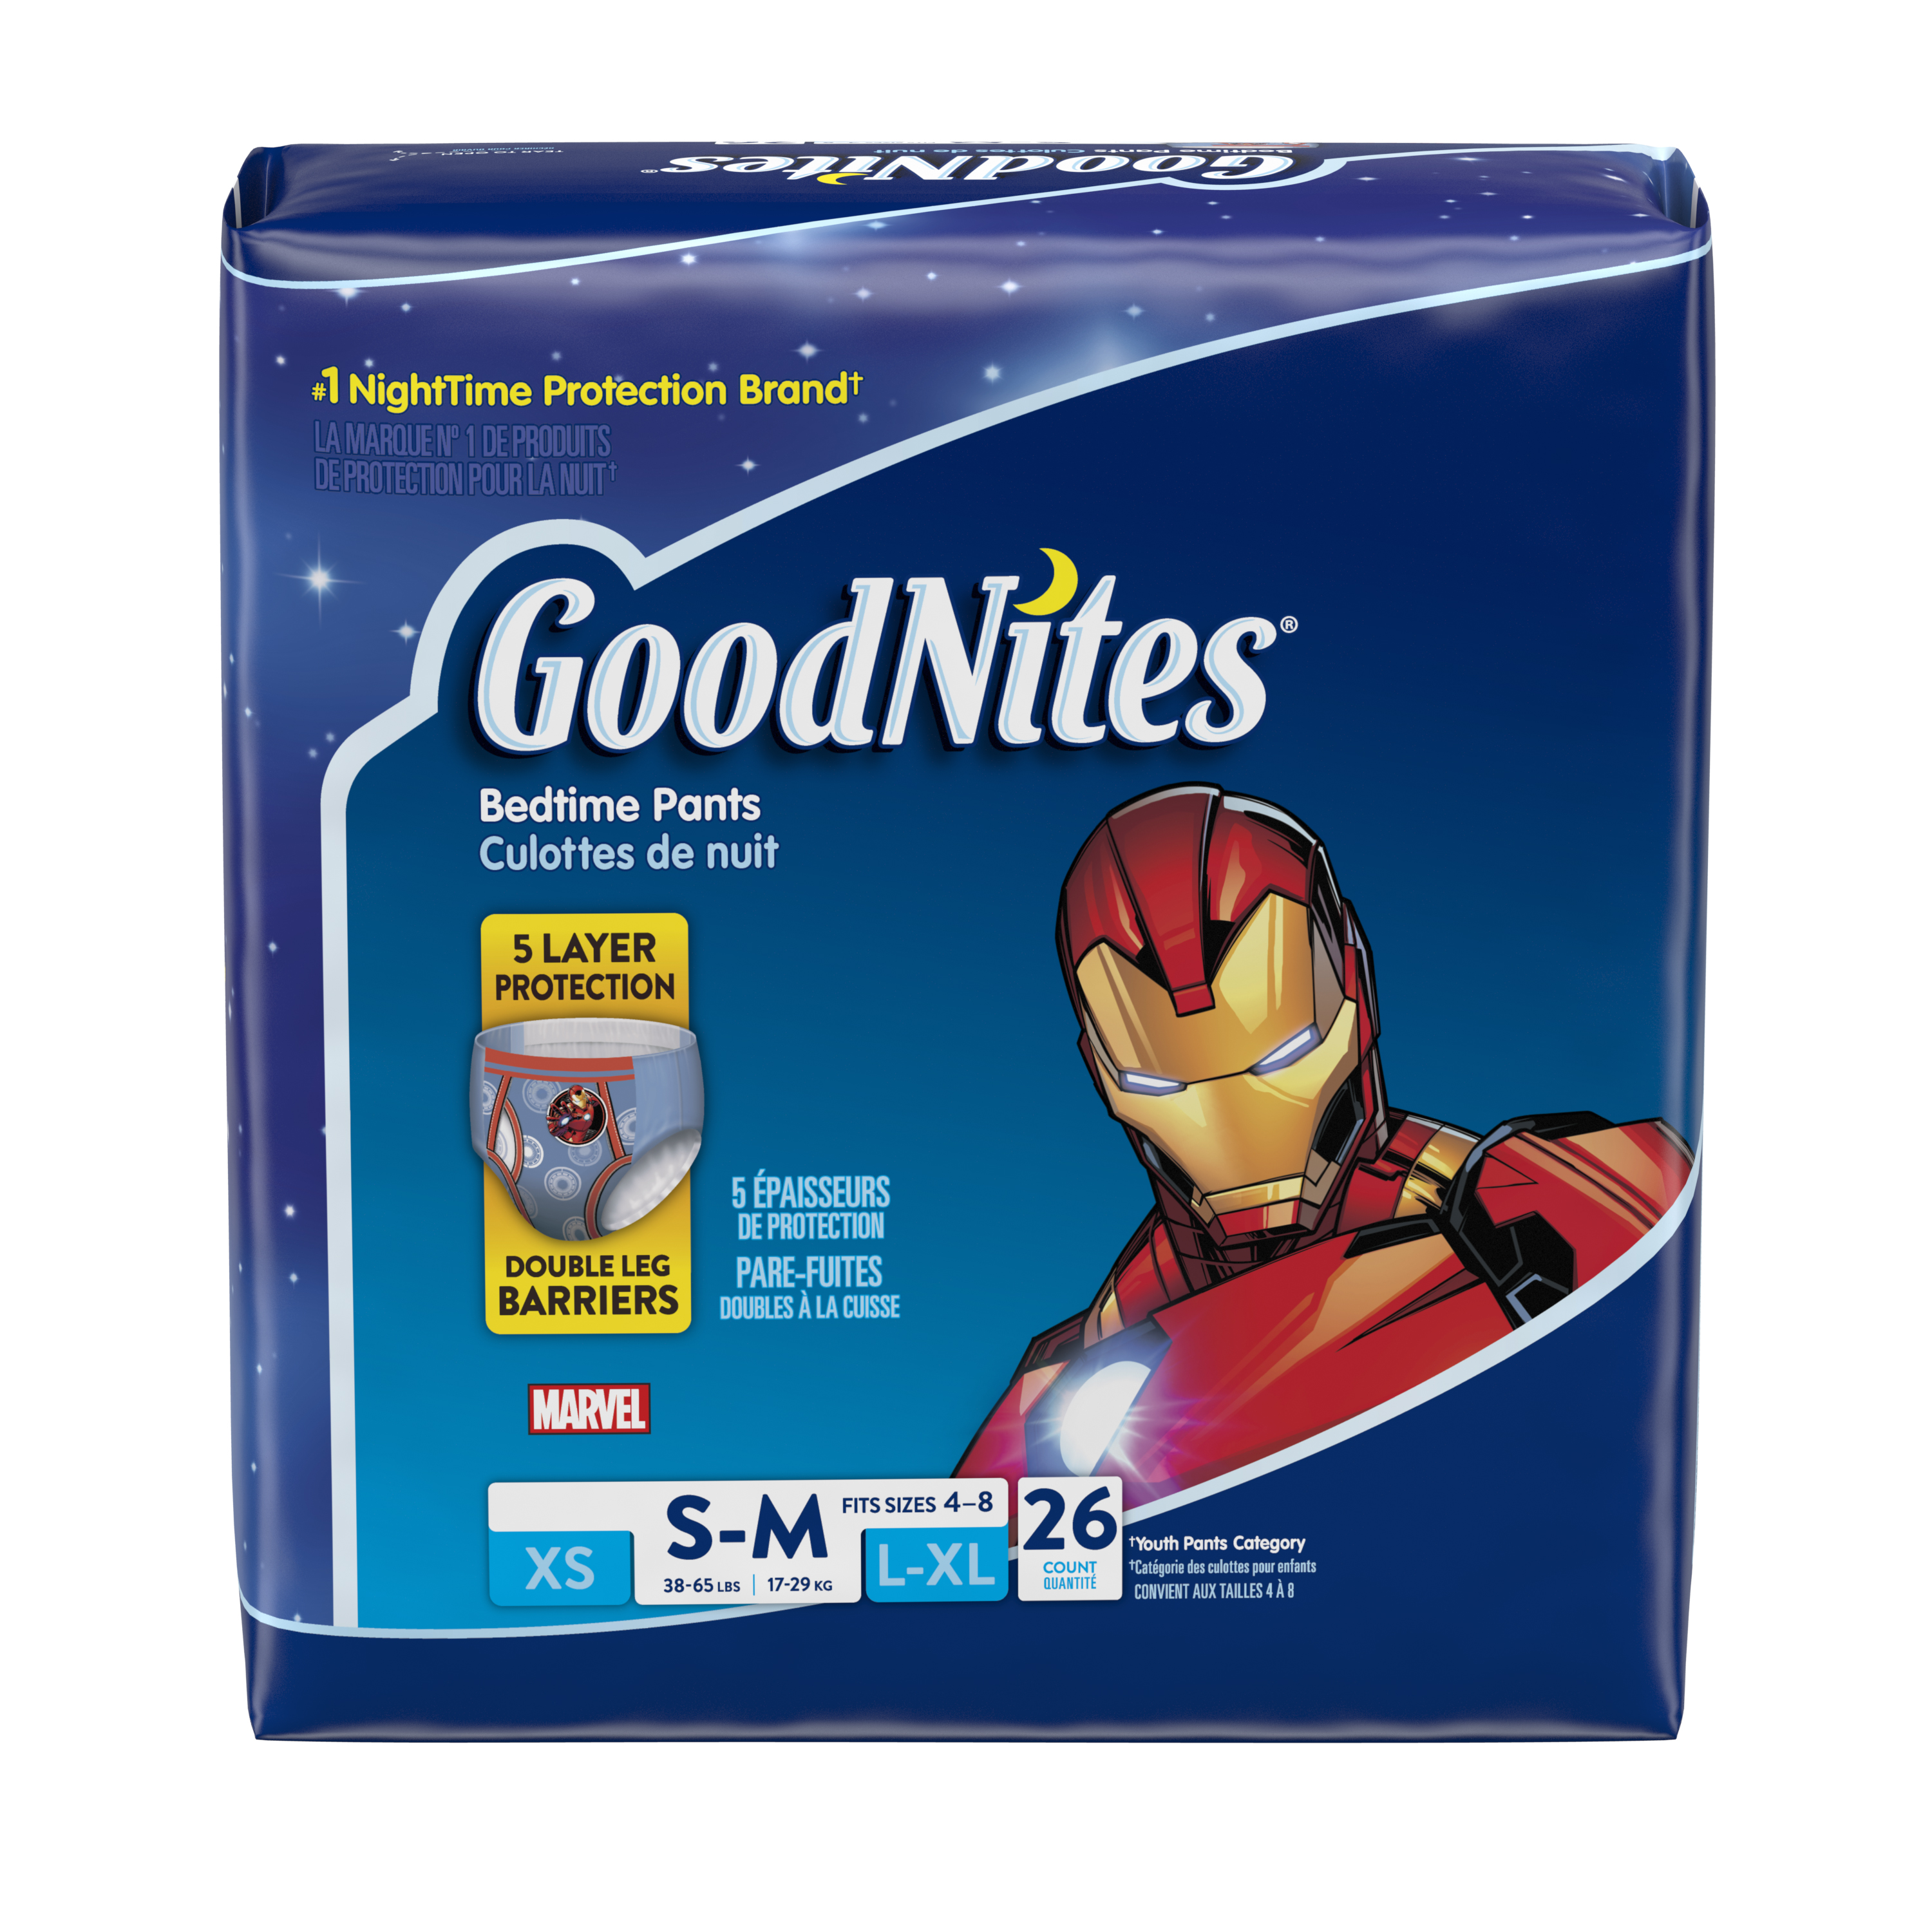 GoodNites Bedtime Bedwetting Underwear for Boys, Size S/M, 26 Count - image 1 of 9